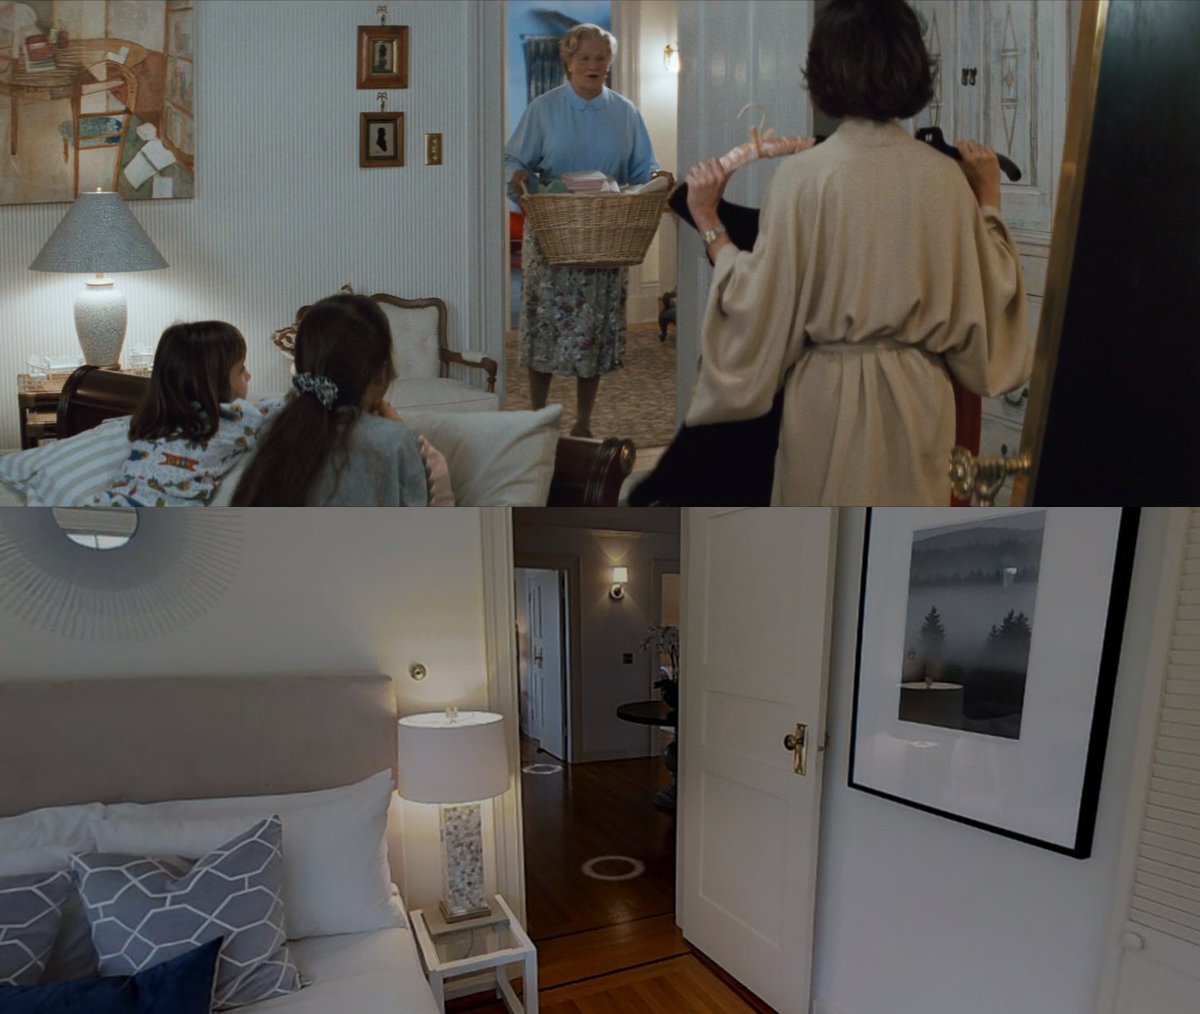 Miranda's room is located in what is now a kid's room. I guess they swapped them around during renovation.